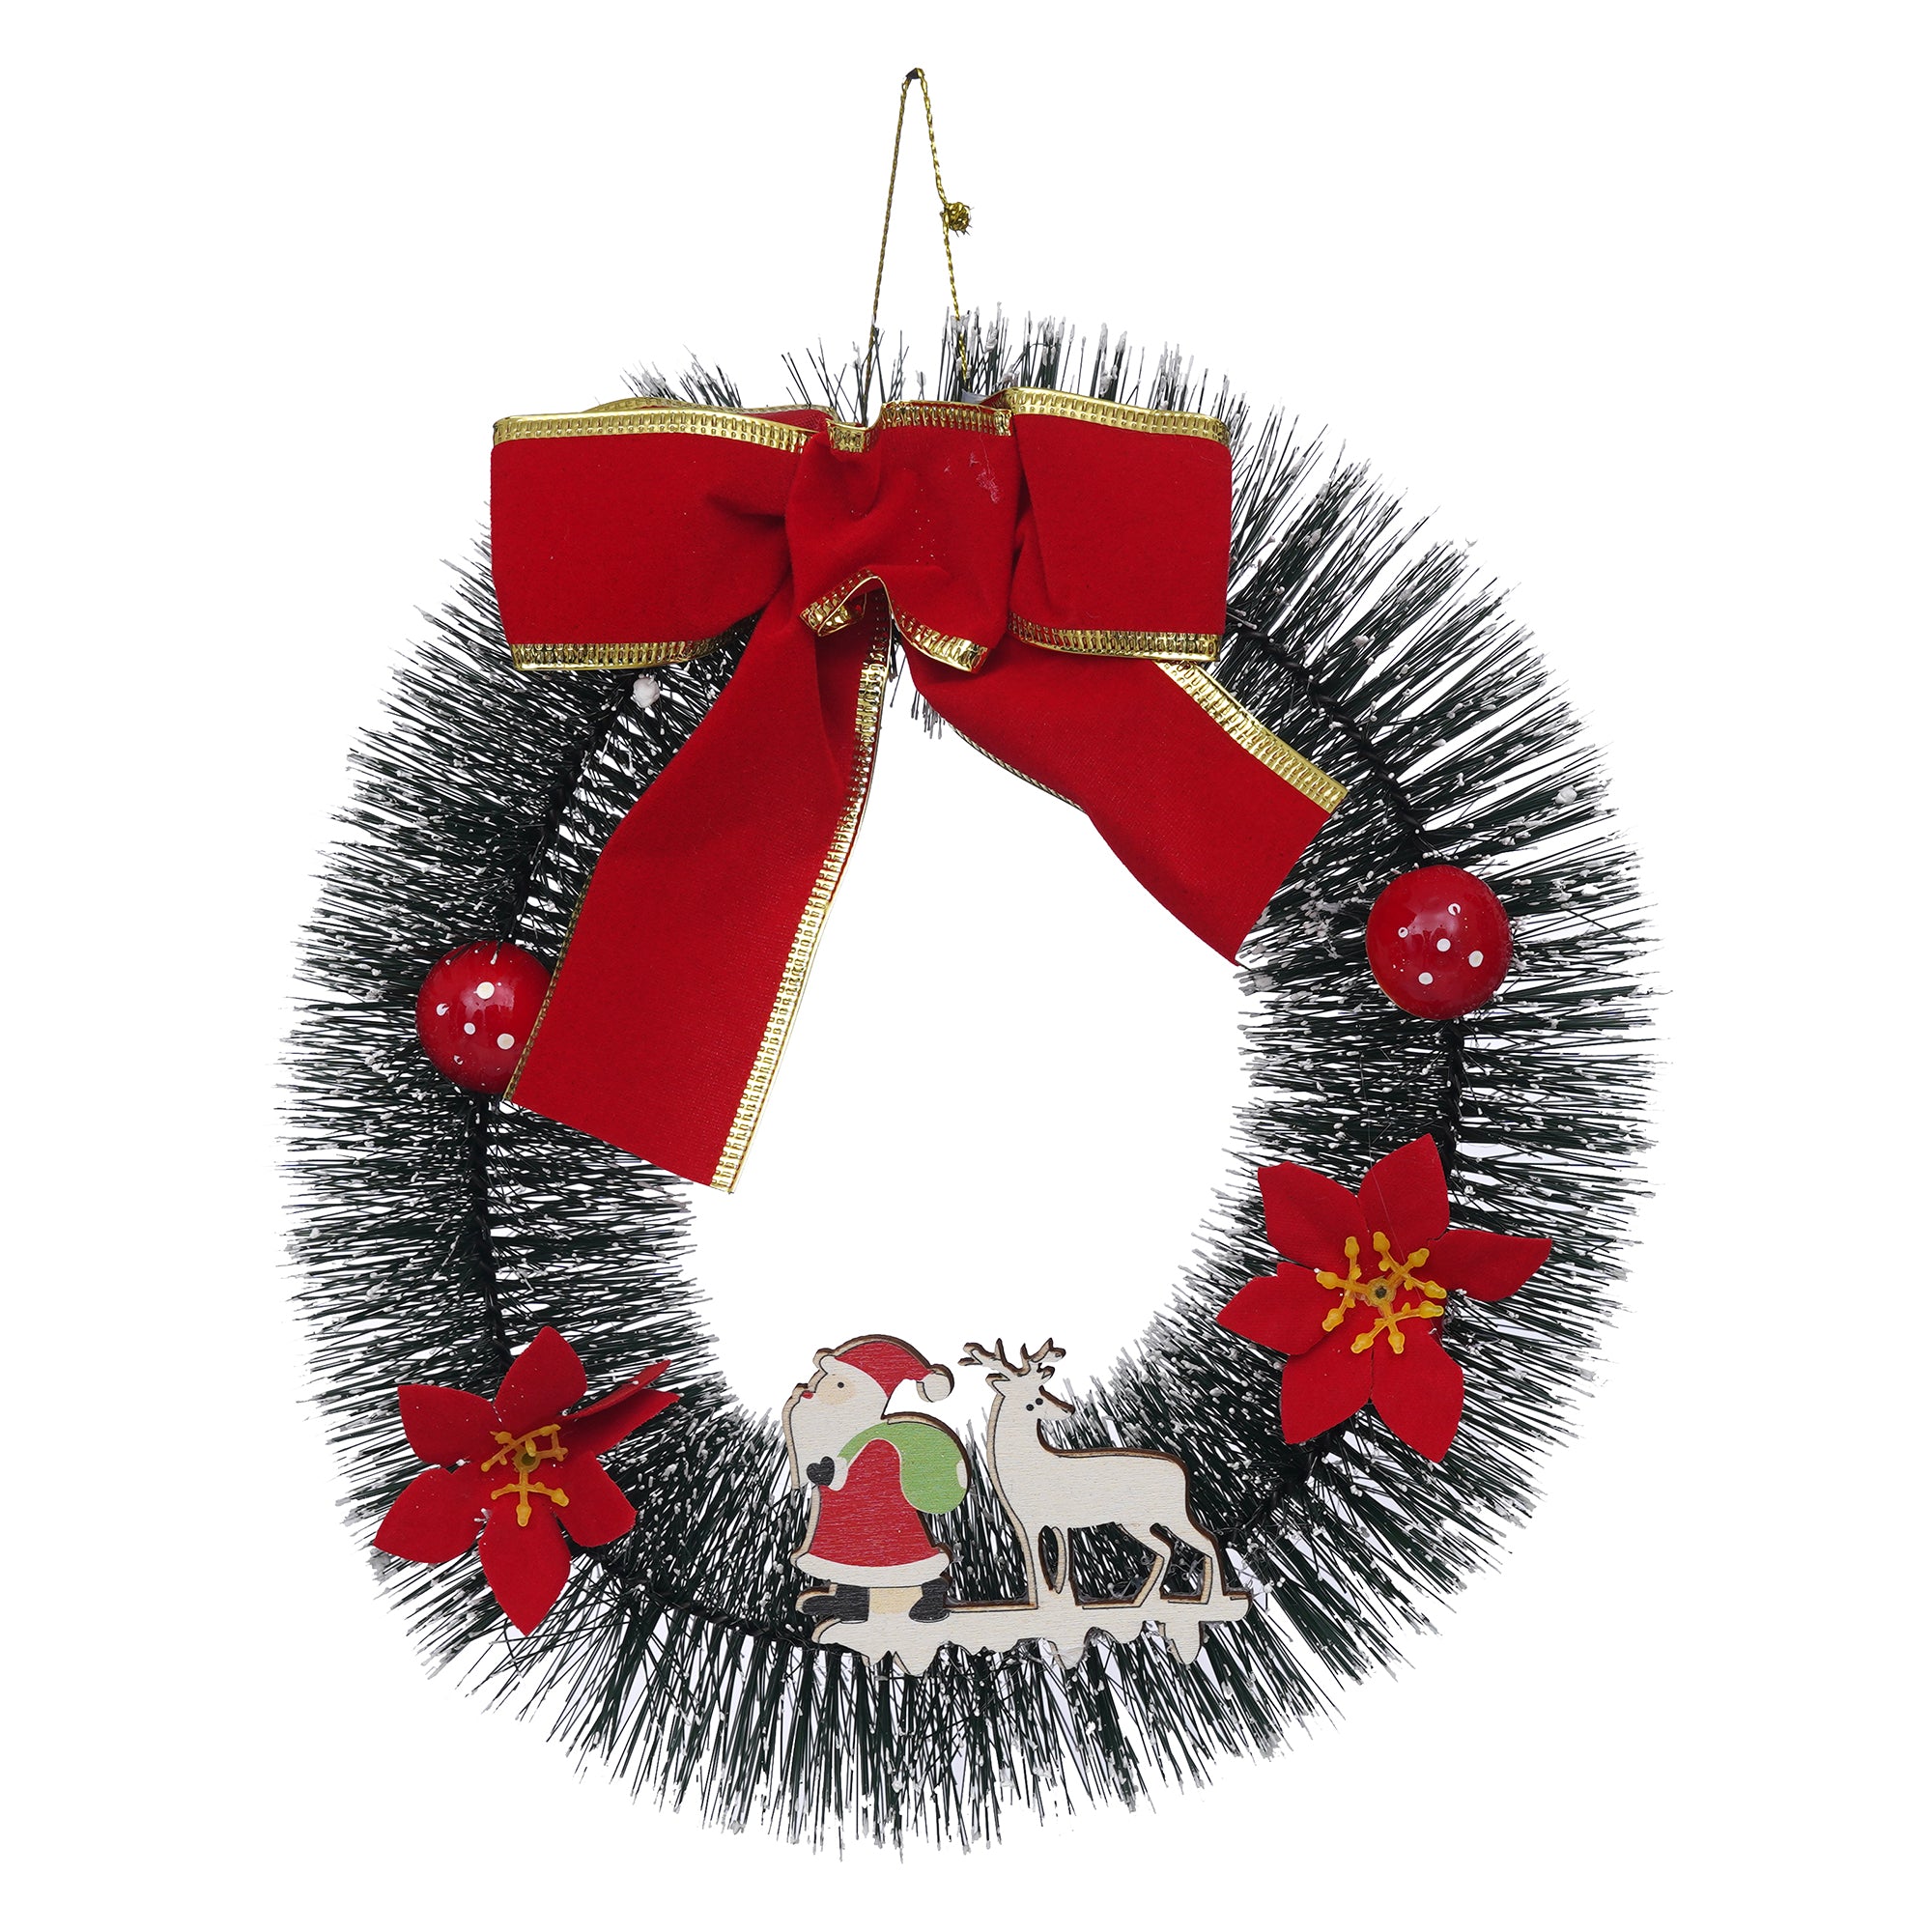 eCraftIndia Christmas Wreath with Santa Claus, Reindeer, Flower, Ball, Ribbon  Christmas Front Door Ornament and Wall Decoration  Artificial Pine Garland For Xmas Party Decor 2